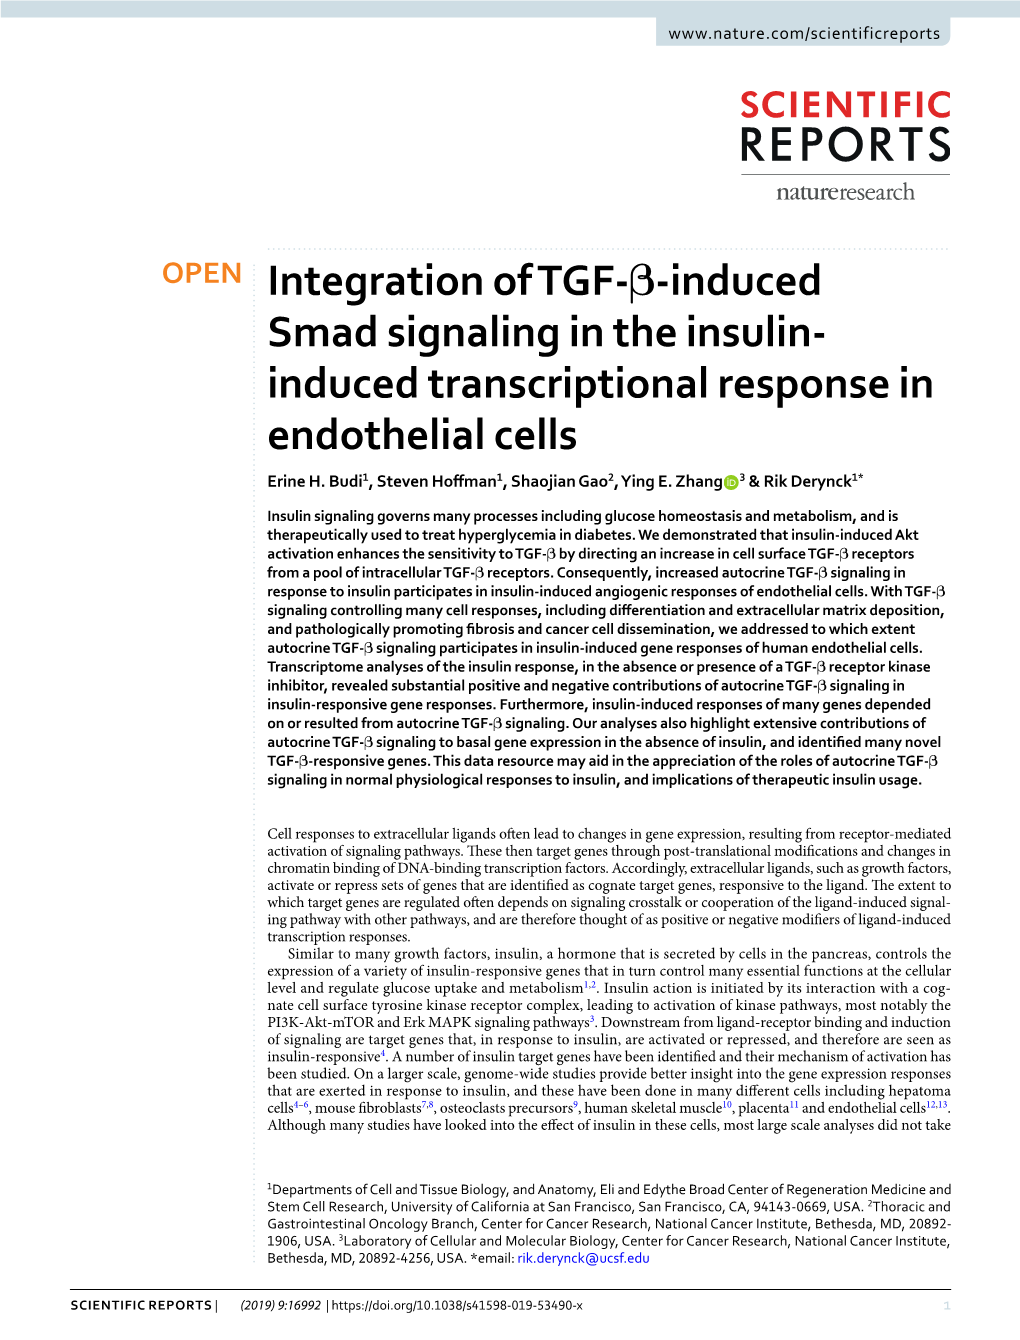 Integration of TGF-Β-Induced Smad Signaling in the Insulin- Induced Transcriptional Response in Endothelial Cells Erine H